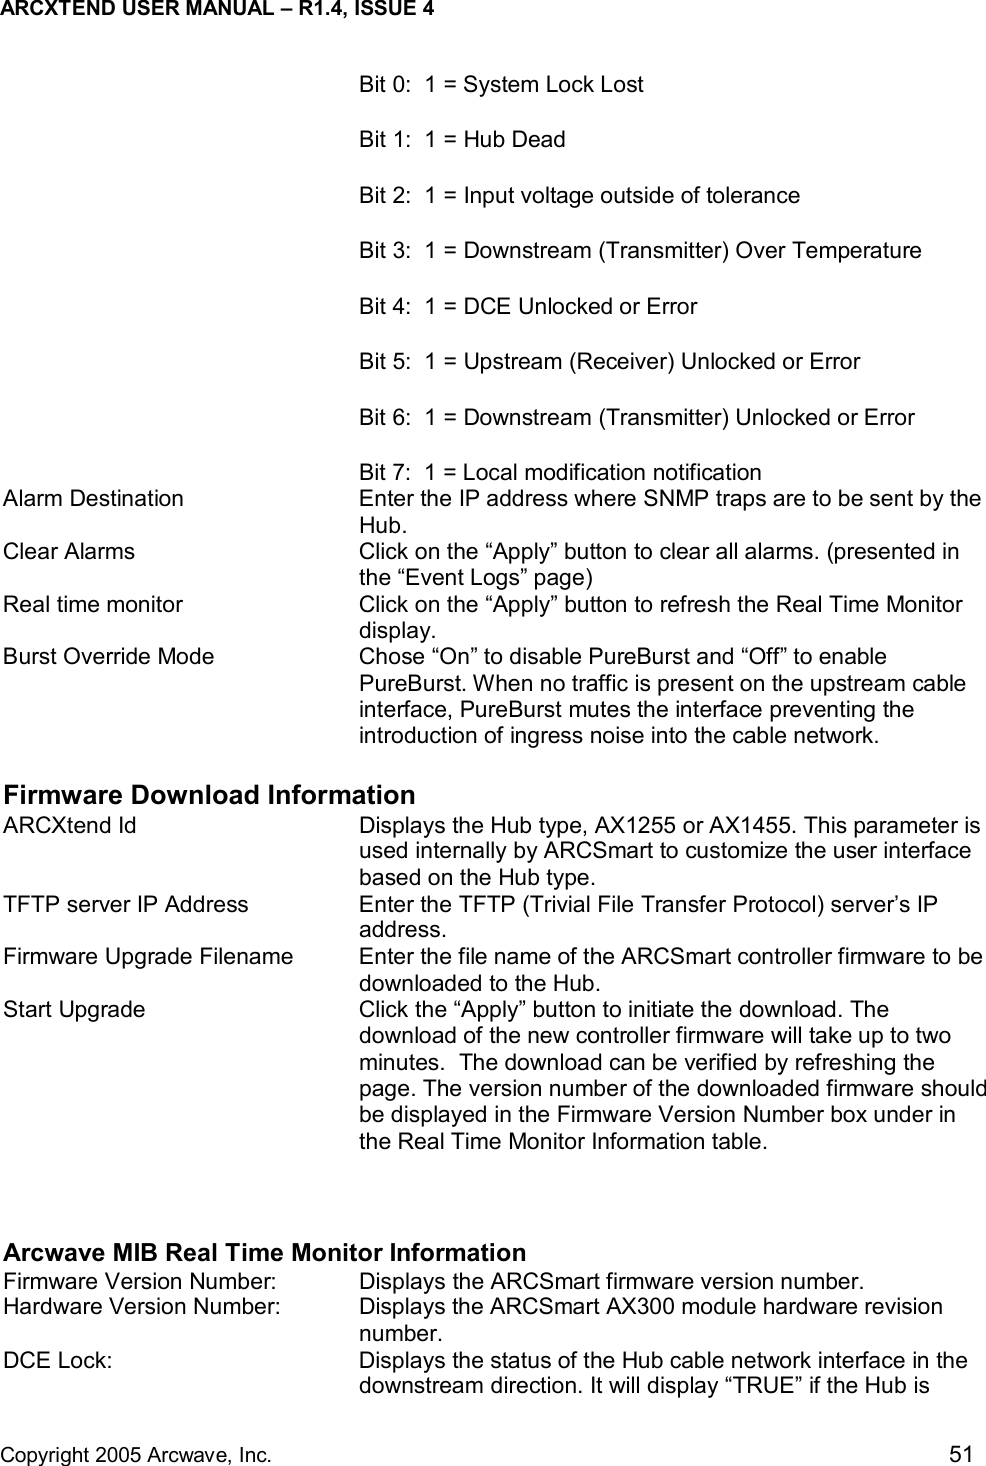 ARCXTEND USER MANUAL – R1.4, ISSUE 4  Copyright 2005 Arcwave, Inc.    51 Bit 0:  1 = System Lock Lost Bit 1:  1 = Hub Dead Bit 2:  1 = Input voltage outside of tolerance Bit 3:  1 = Downstream (Transmitter) Over Temperature Bit 4:  1 = DCE Unlocked or Error Bit 5:  1 = Upstream (Receiver) Unlocked or Error Bit 6:  1 = Downstream (Transmitter) Unlocked or Error Bit 7:  1 = Local modification notification Alarm Destination  Enter the IP address where SNMP traps are to be sent by the Hub. Clear Alarms  Click on the “Apply” button to clear all alarms. (presented in the “Event Logs” page) Real time monitor  Click on the “Apply” button to refresh the Real Time Monitor display. Burst Override Mode  Chose “On” to disable PureBurst and “Off” to enable PureBurst. When no traffic is present on the upstream cable interface, PureBurst mutes the interface preventing the introduction of ingress noise into the cable network.  Firmware Download Information ARCXtend Id  Displays the Hub type, AX1255 or AX1455. This parameter is used internally by ARCSmart to customize the user interface based on the Hub type.  TFTP server IP Address  Enter the TFTP (Trivial File Transfer Protocol) server’s IP address. Firmware Upgrade Filename  Enter the file name of the ARCSmart controller firmware to be downloaded to the Hub.  Start Upgrade  Click the “Apply” button to initiate the download. The download of the new controller firmware will take up to two minutes.  The download can be verified by refreshing the page. The version number of the downloaded firmware should be displayed in the Firmware Version Number box under in the Real Time Monitor Information table.   Arcwave MIB Real Time Monitor Information Firmware Version Number:  Displays the ARCSmart firmware version number.  Hardware Version Number:  Displays the ARCSmart AX300 module hardware revision number.  DCE Lock:  Displays the status of the Hub cable network interface in the downstream direction. It will display “TRUE” if the Hub is 